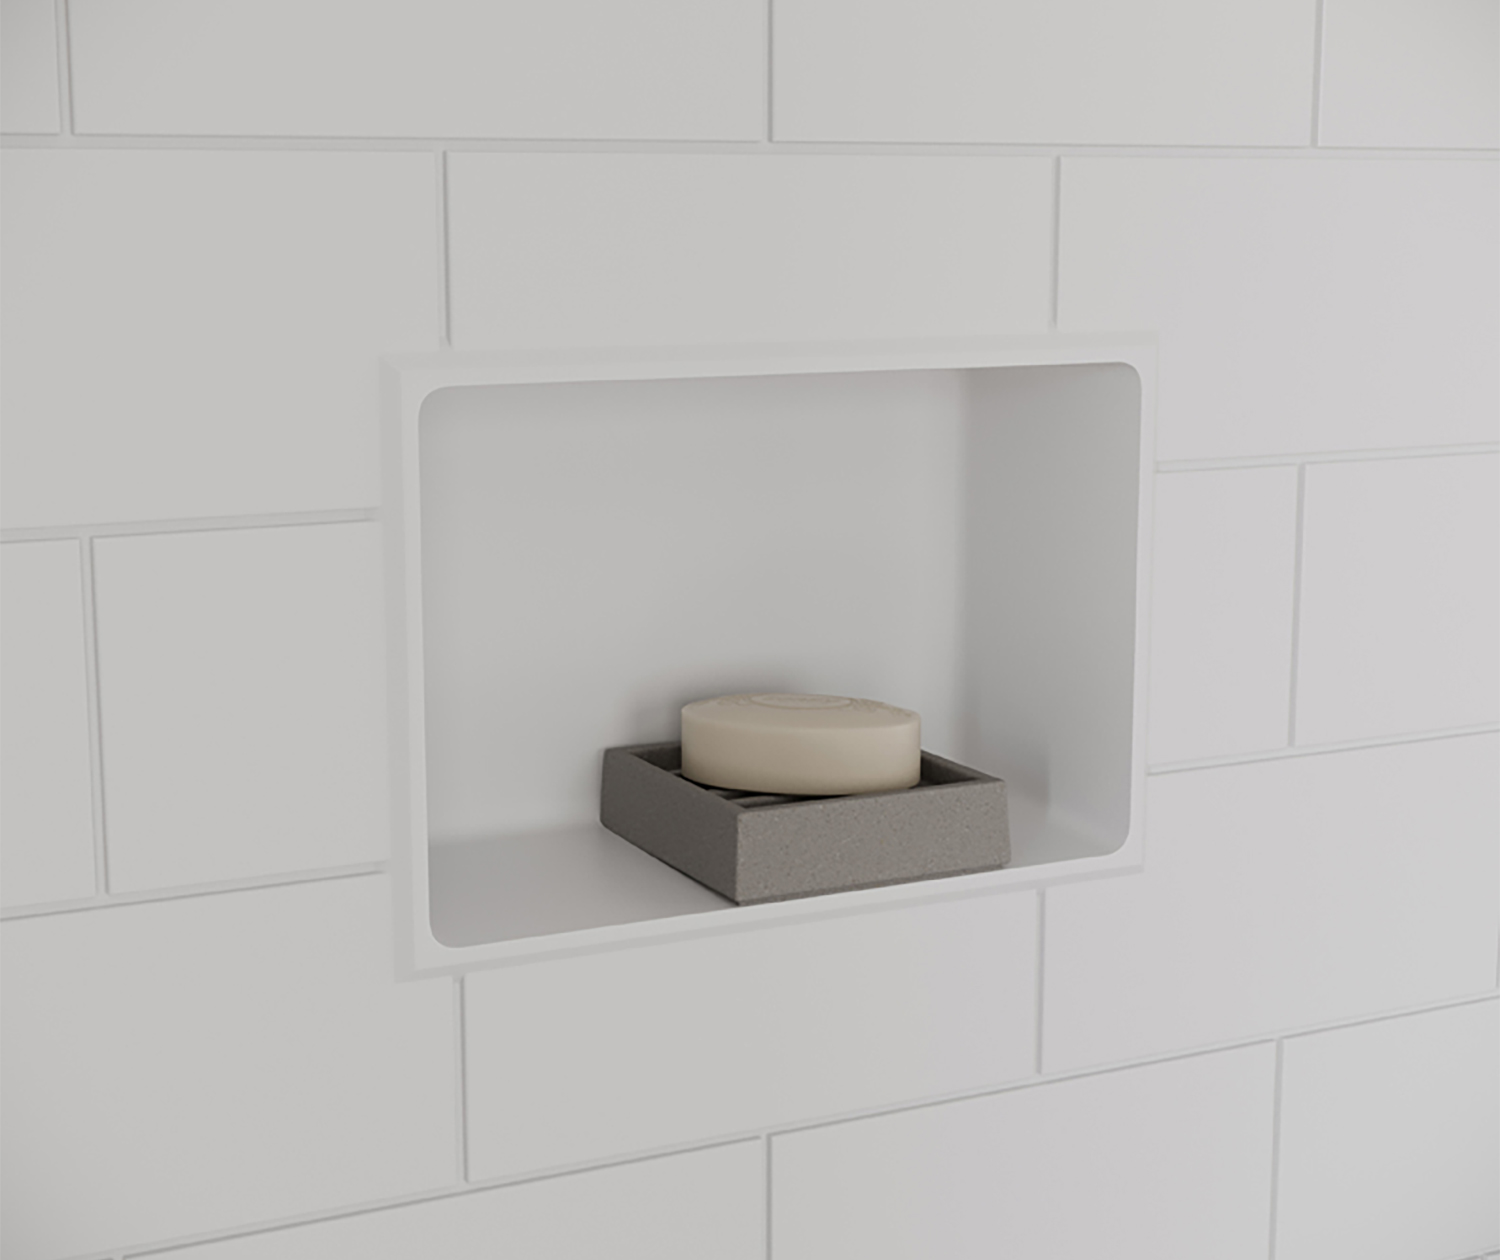 http://res.cloudinary.com/american-bath-group/image/upload/v1667245600/websites-product-info-and-content/swan/content/products/bathroom/accessories/swan-accessories-recessed-accessory-shelf-as1075.jpg